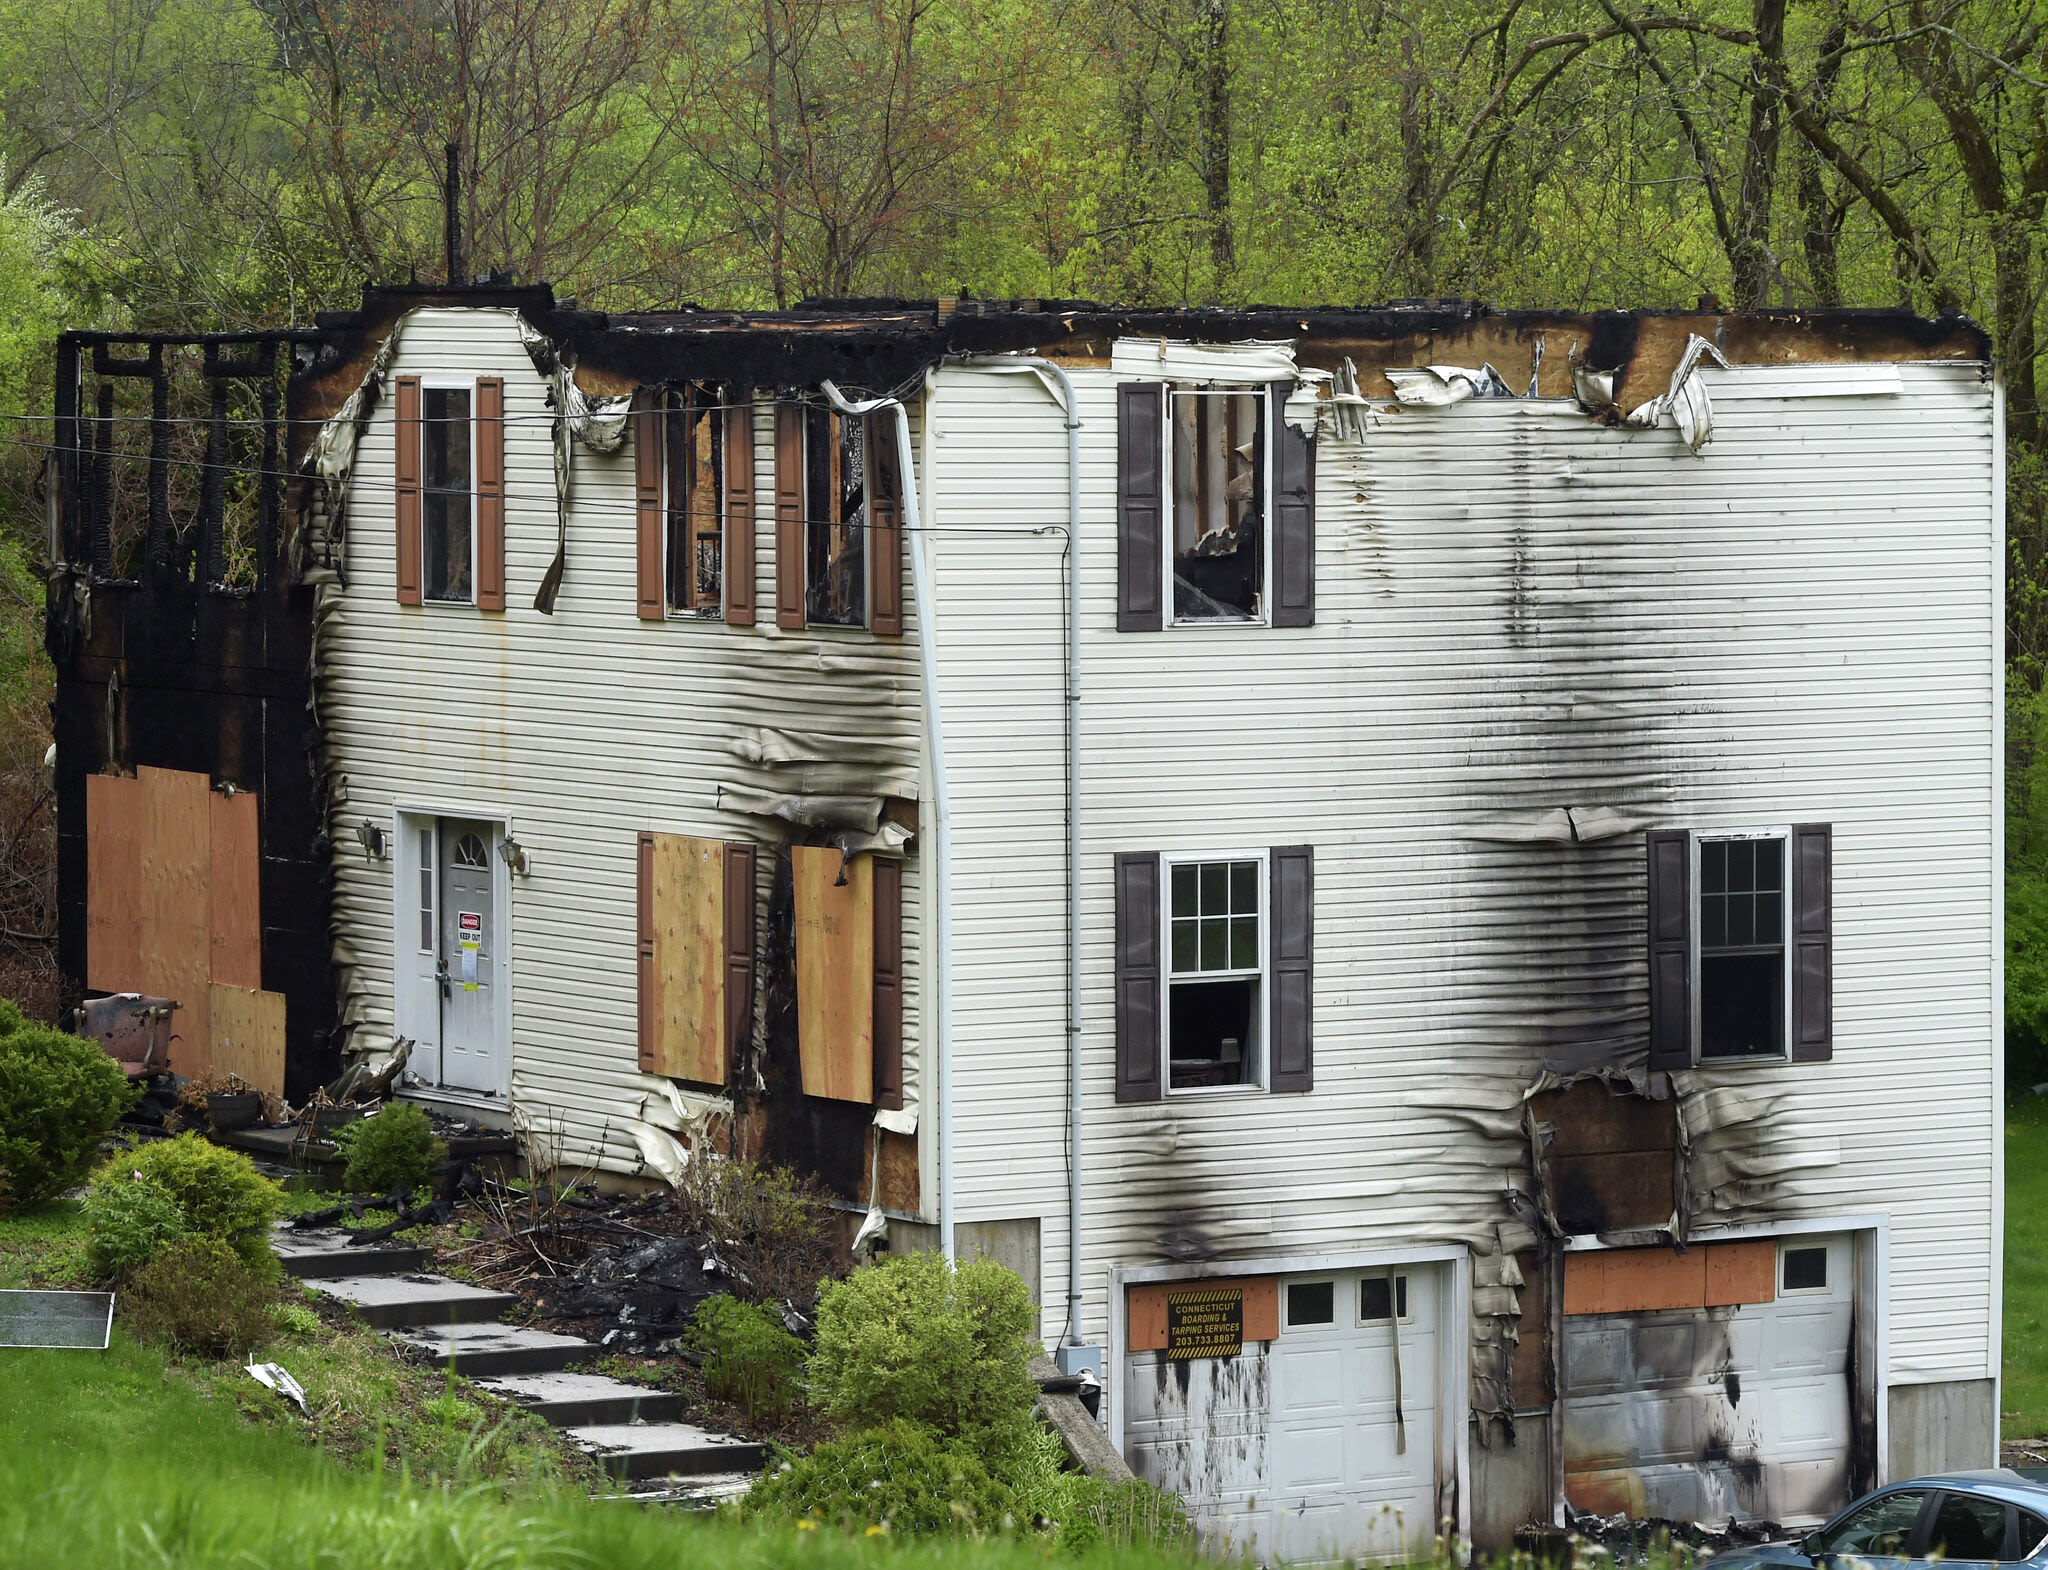 CT coroner examines remains found at New Fairfield house fire, ME's office says